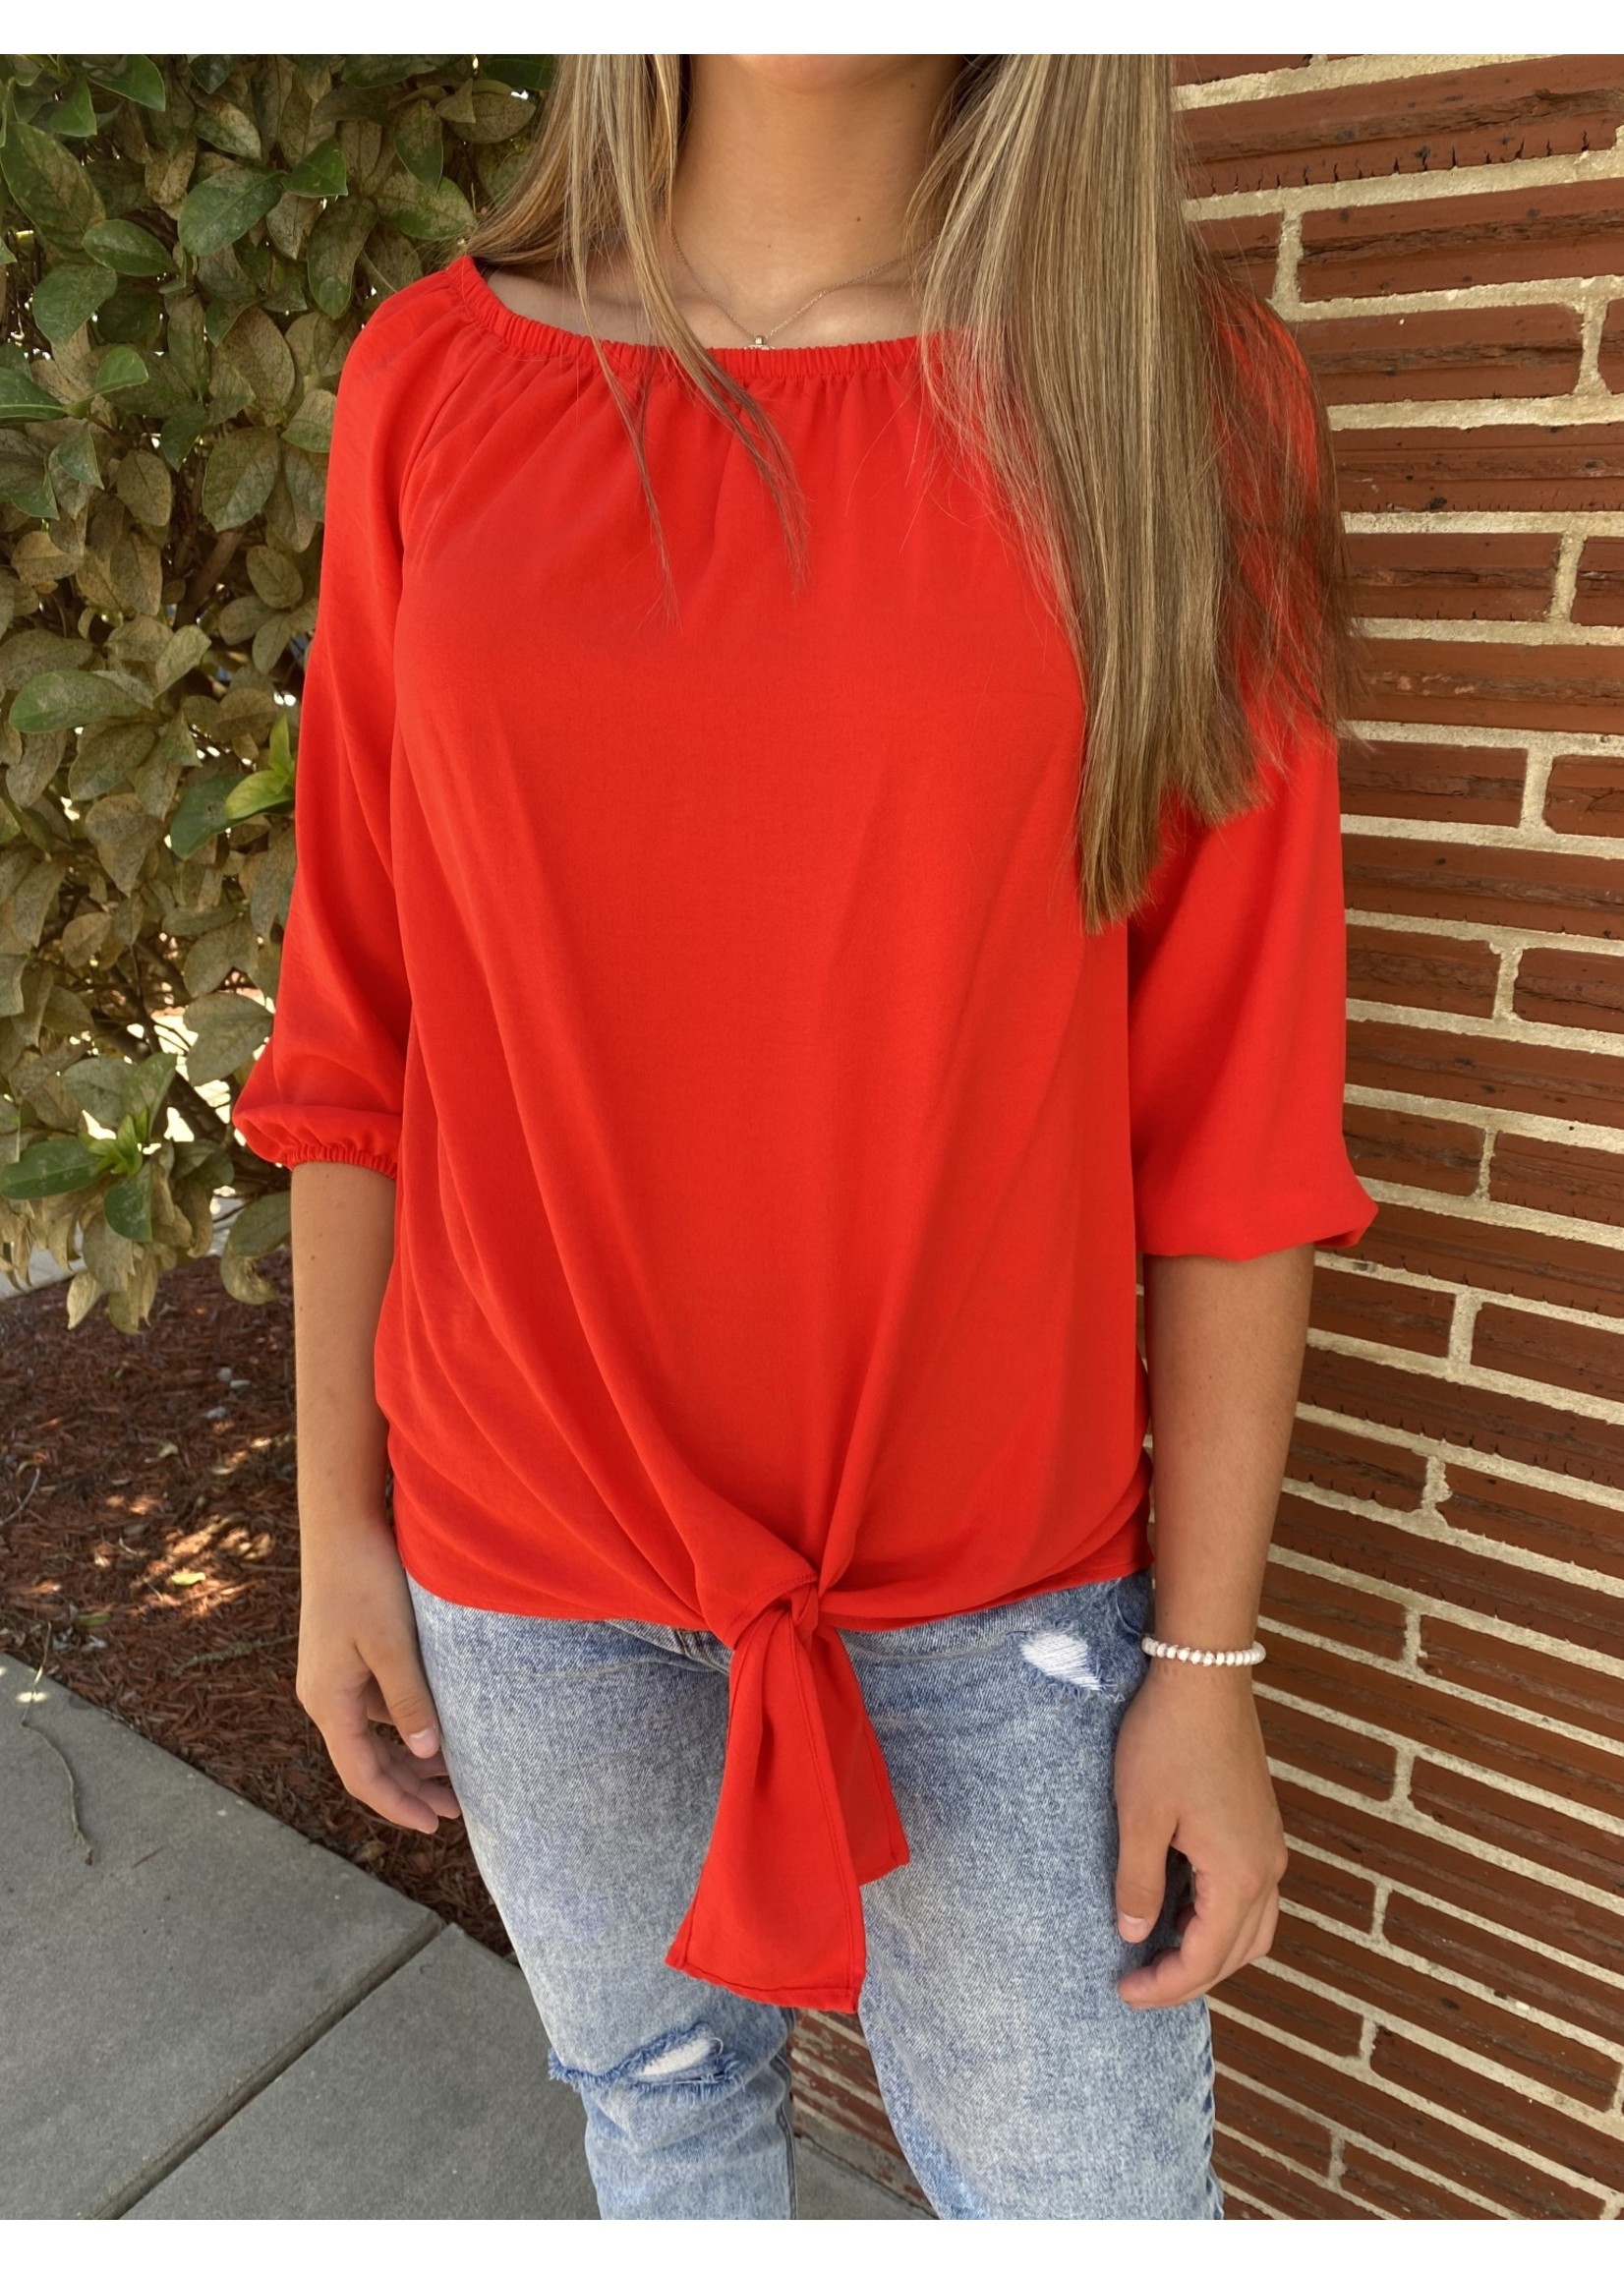 Red Top with Open Shoulder Neckline and Front Tie